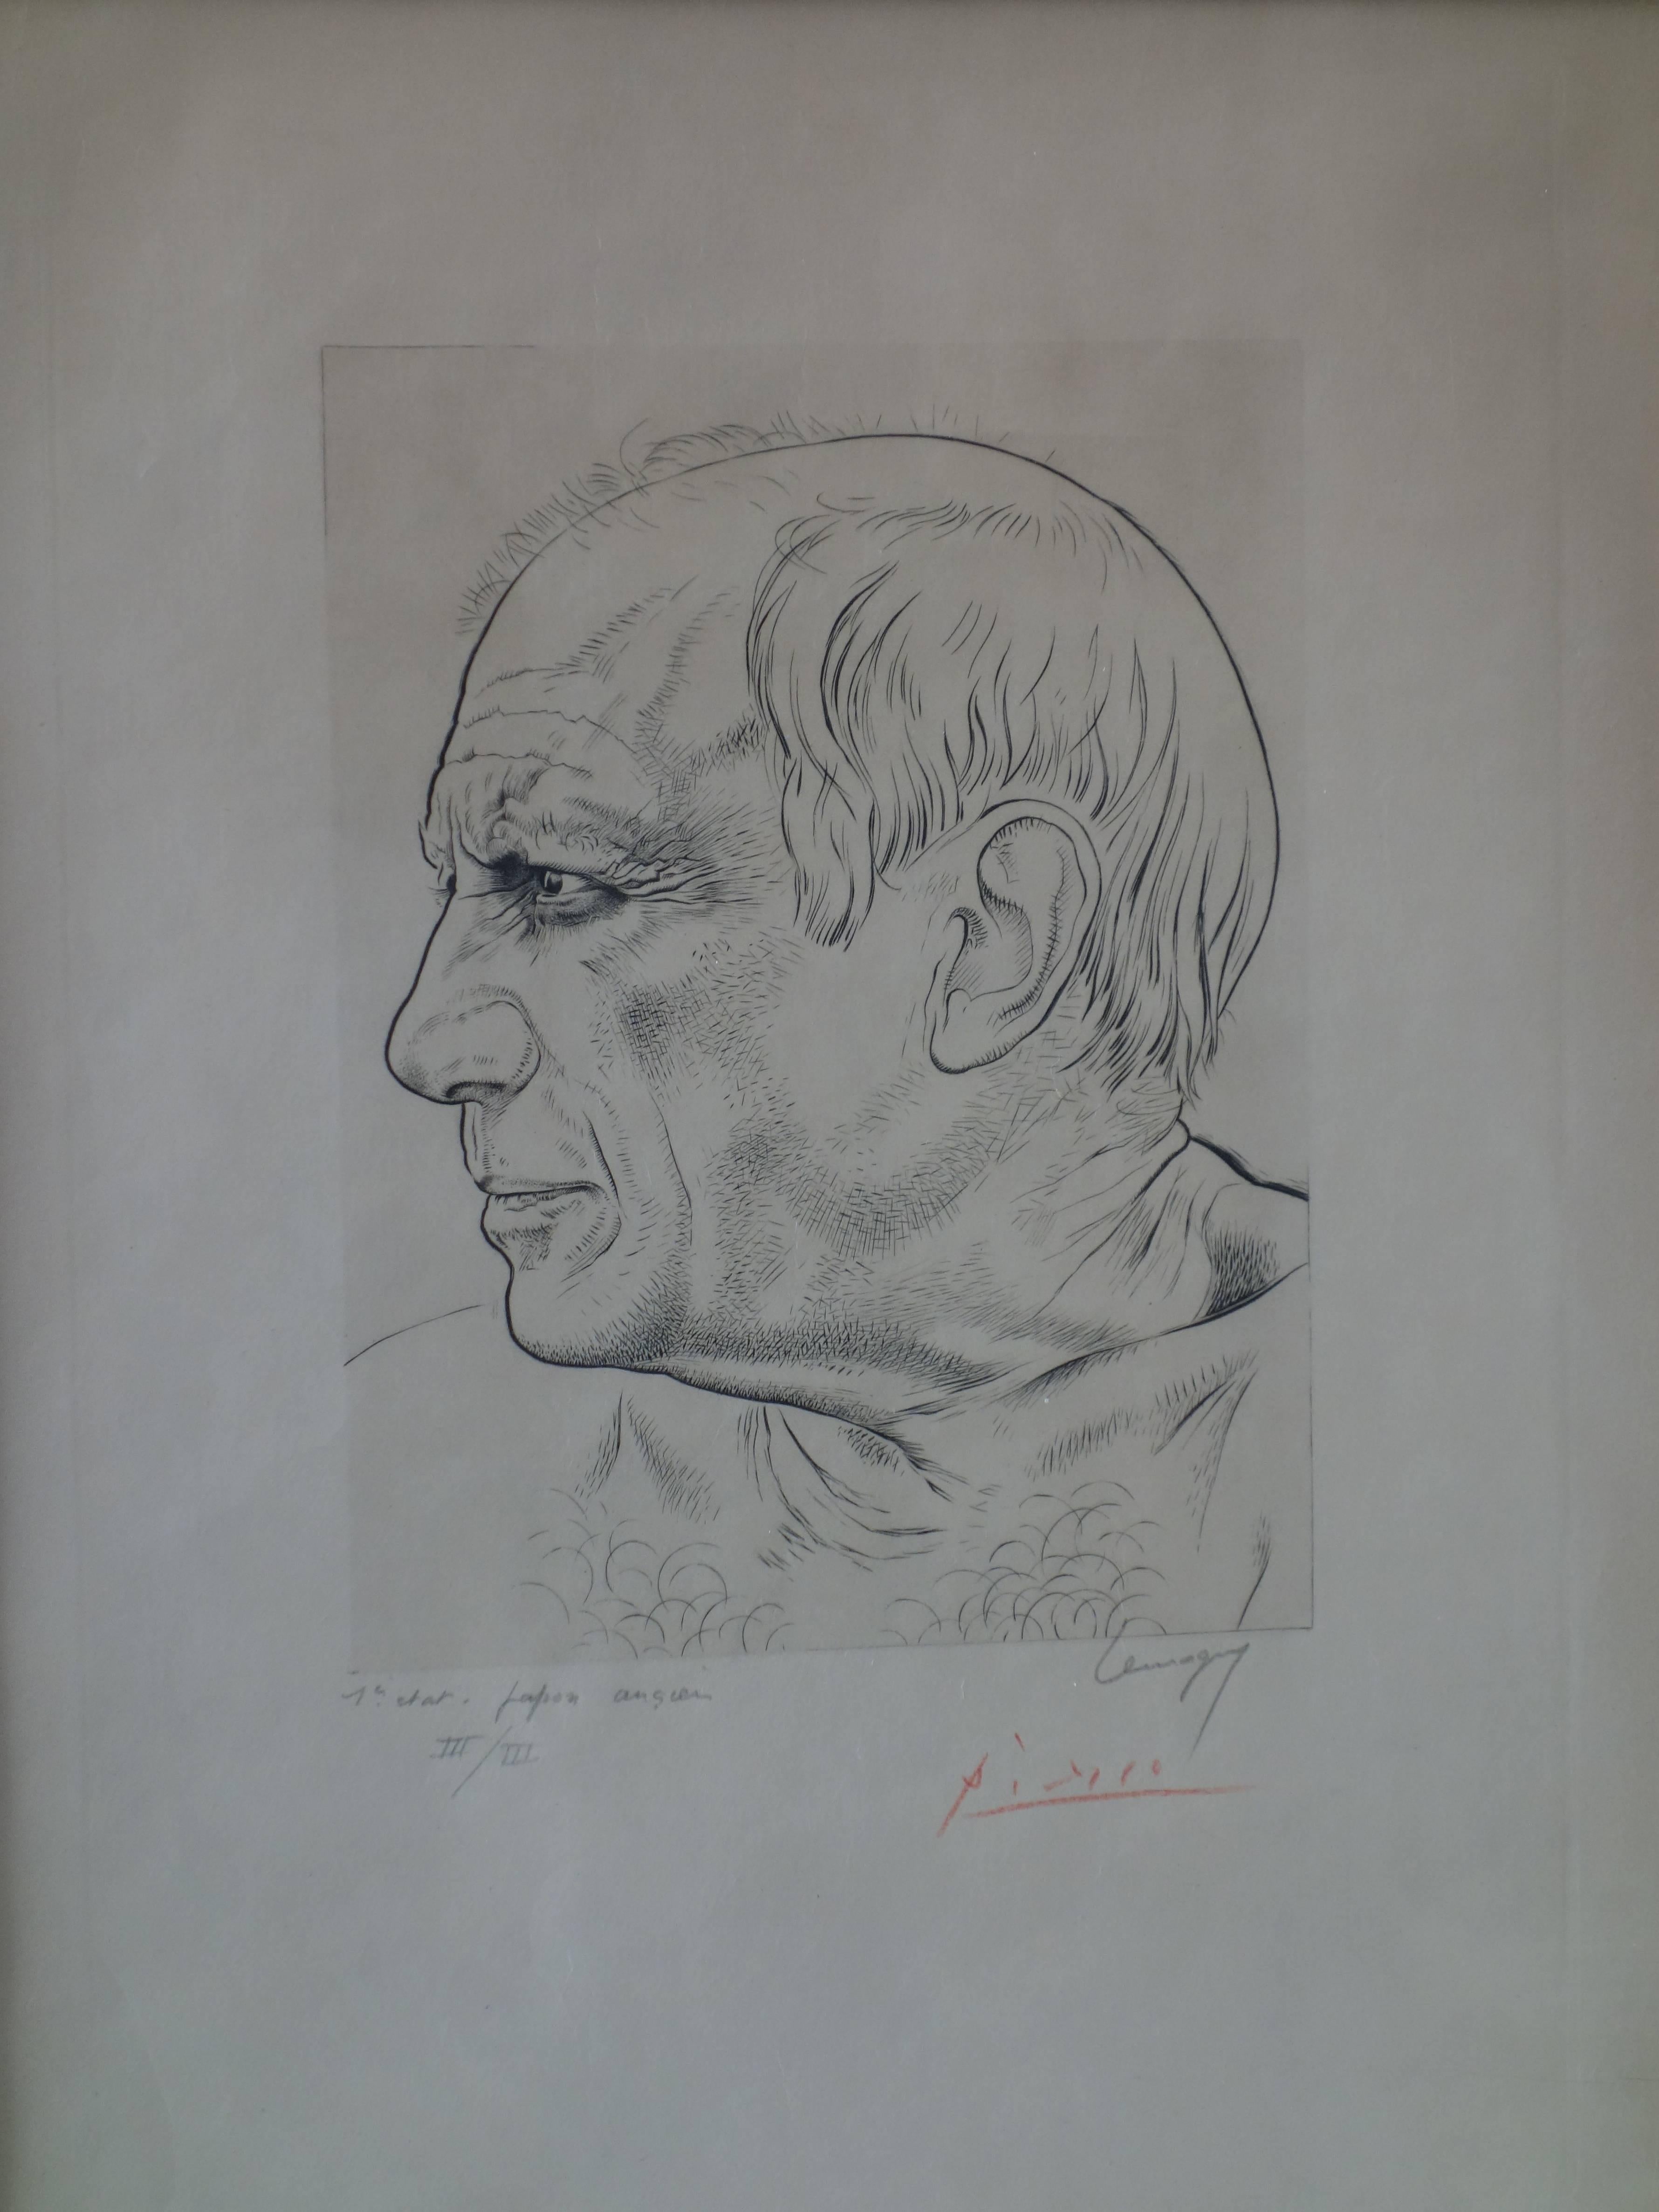 Paul Lemagny Portrait Print - Portrait of Picasso - Original etching - Handsigned by Picasso (only 3 proofs)